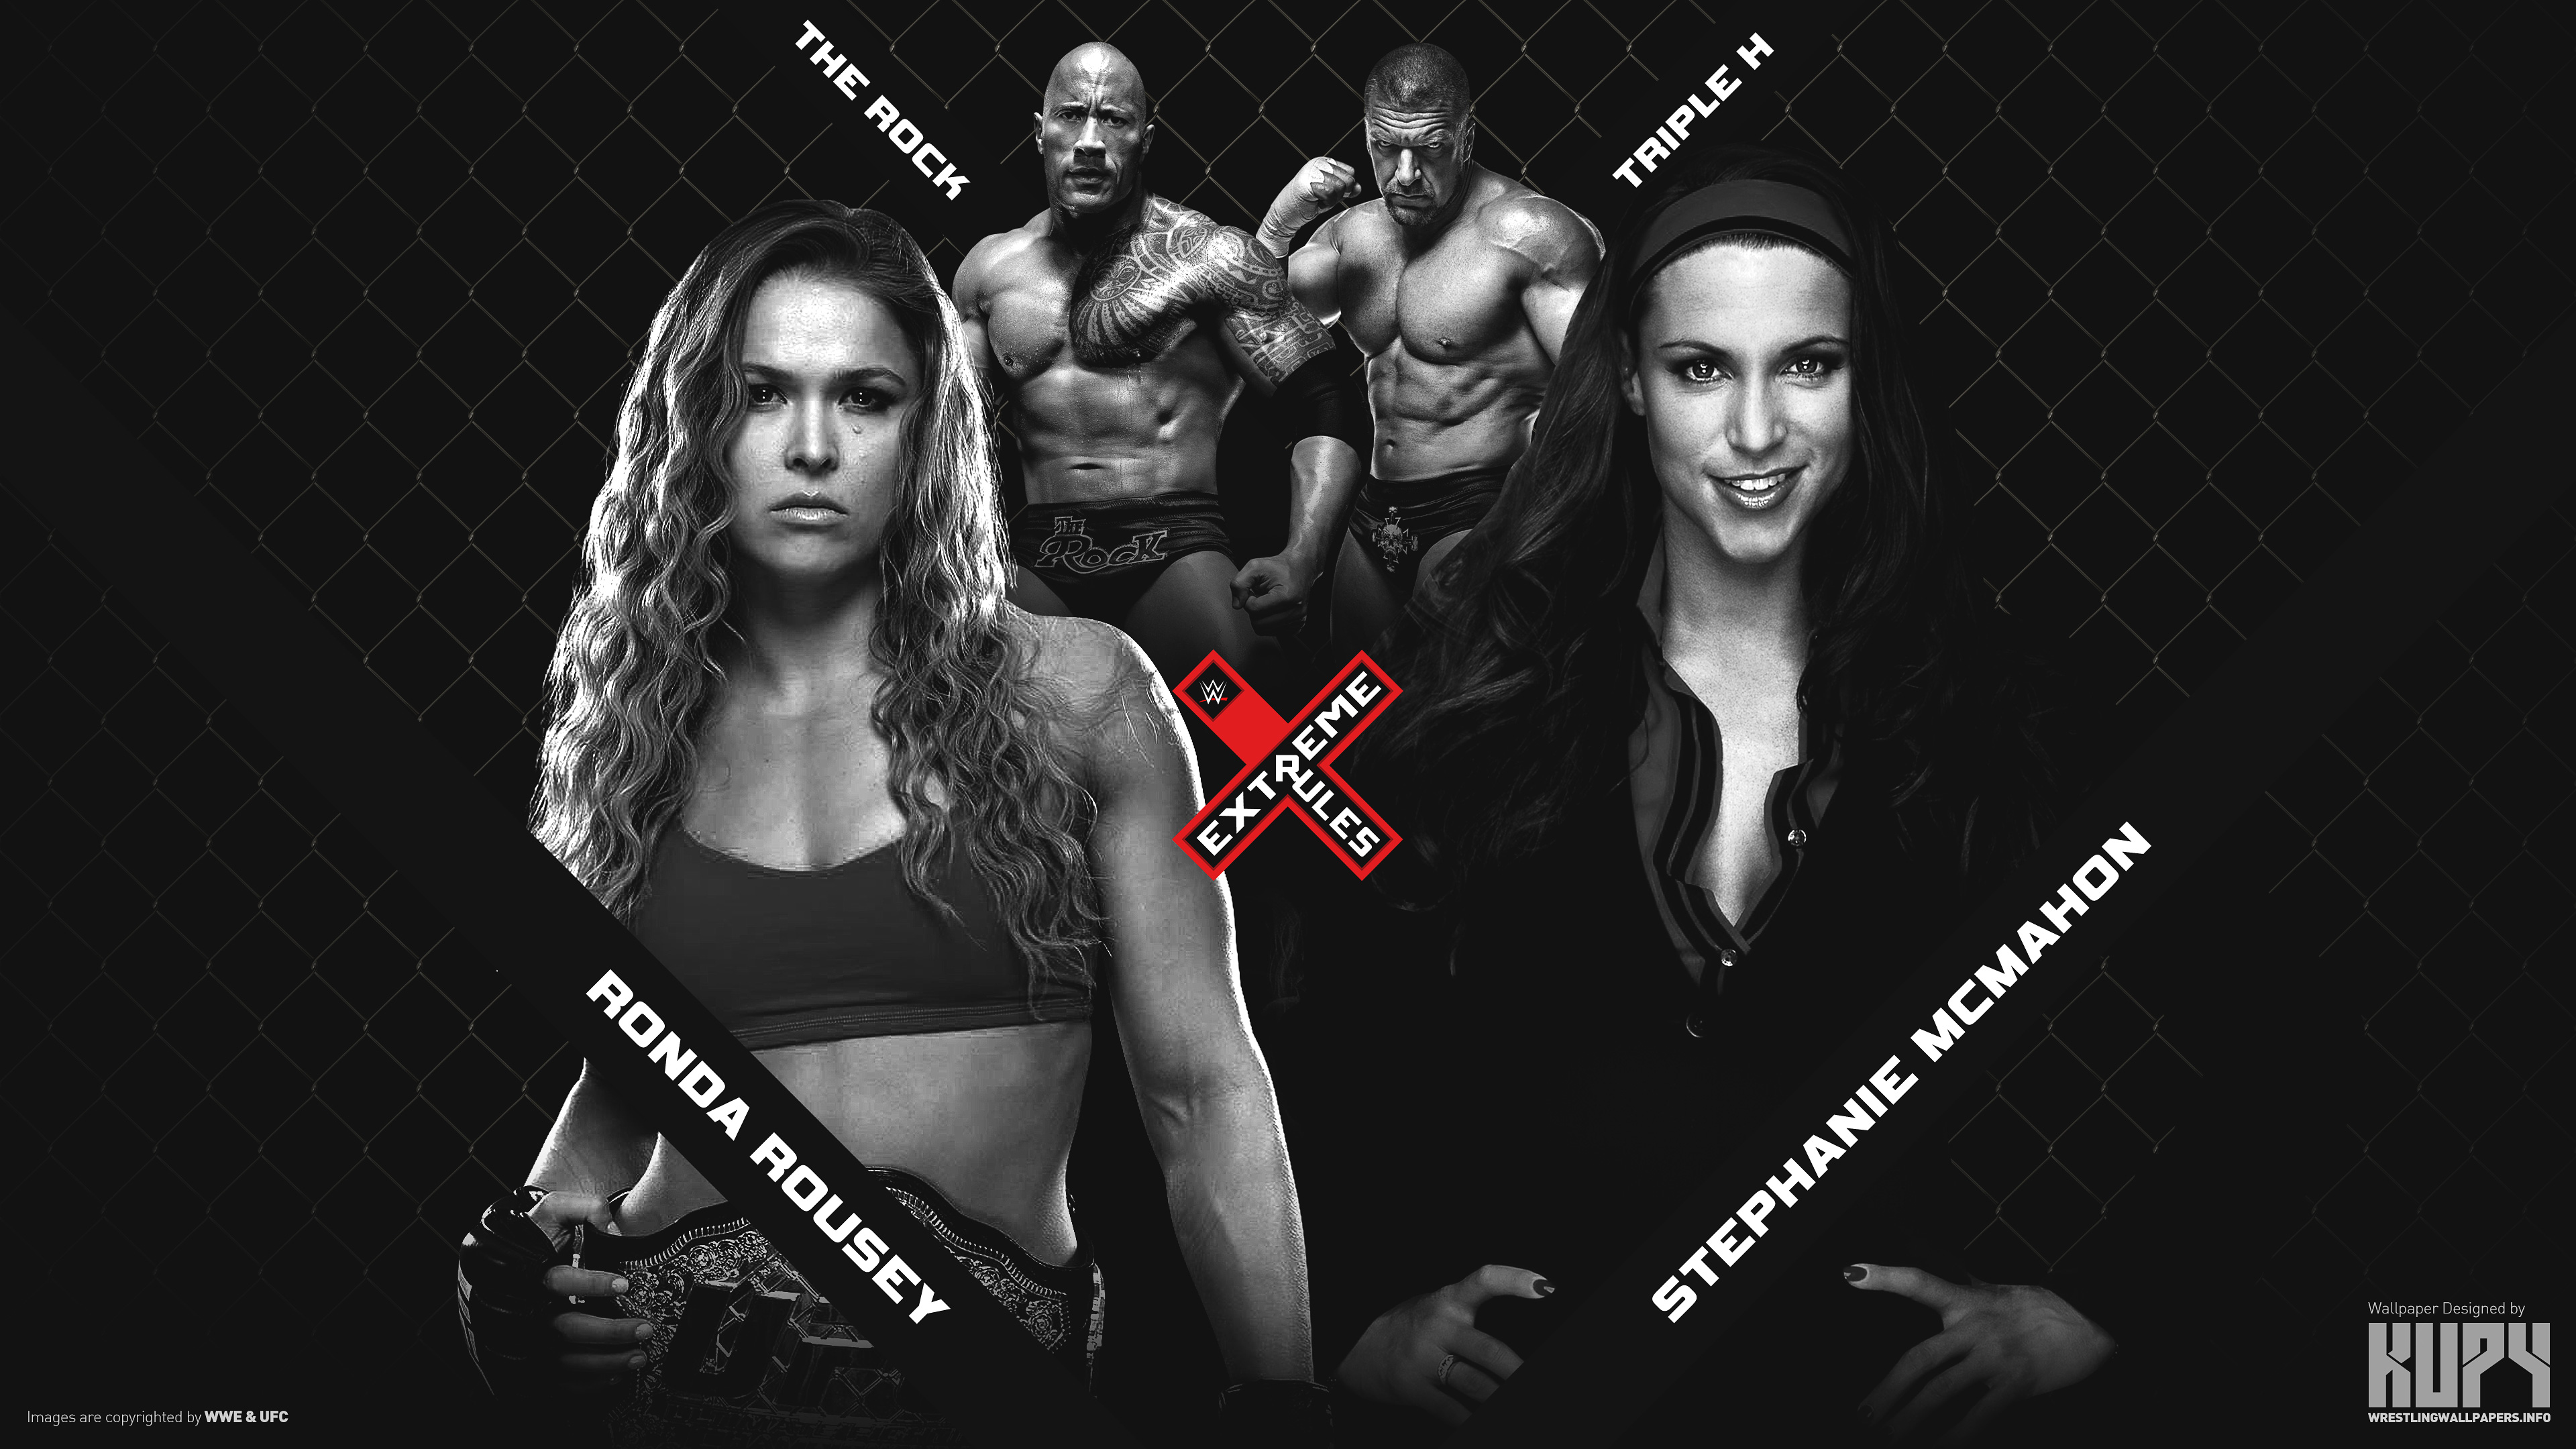 Kupy Wrestling Wallpapers The Latest Source For Your Wwe Wrestling Wallpaper Needs Mobile Hd And 4k Resolutions Available Ronda Rousey Archives Kupy Wrestling Wallpapers The Latest Source For Your 46+ ronda rousey wallpapers on wallpapersafari. kupy wrestling wallpapers the latest